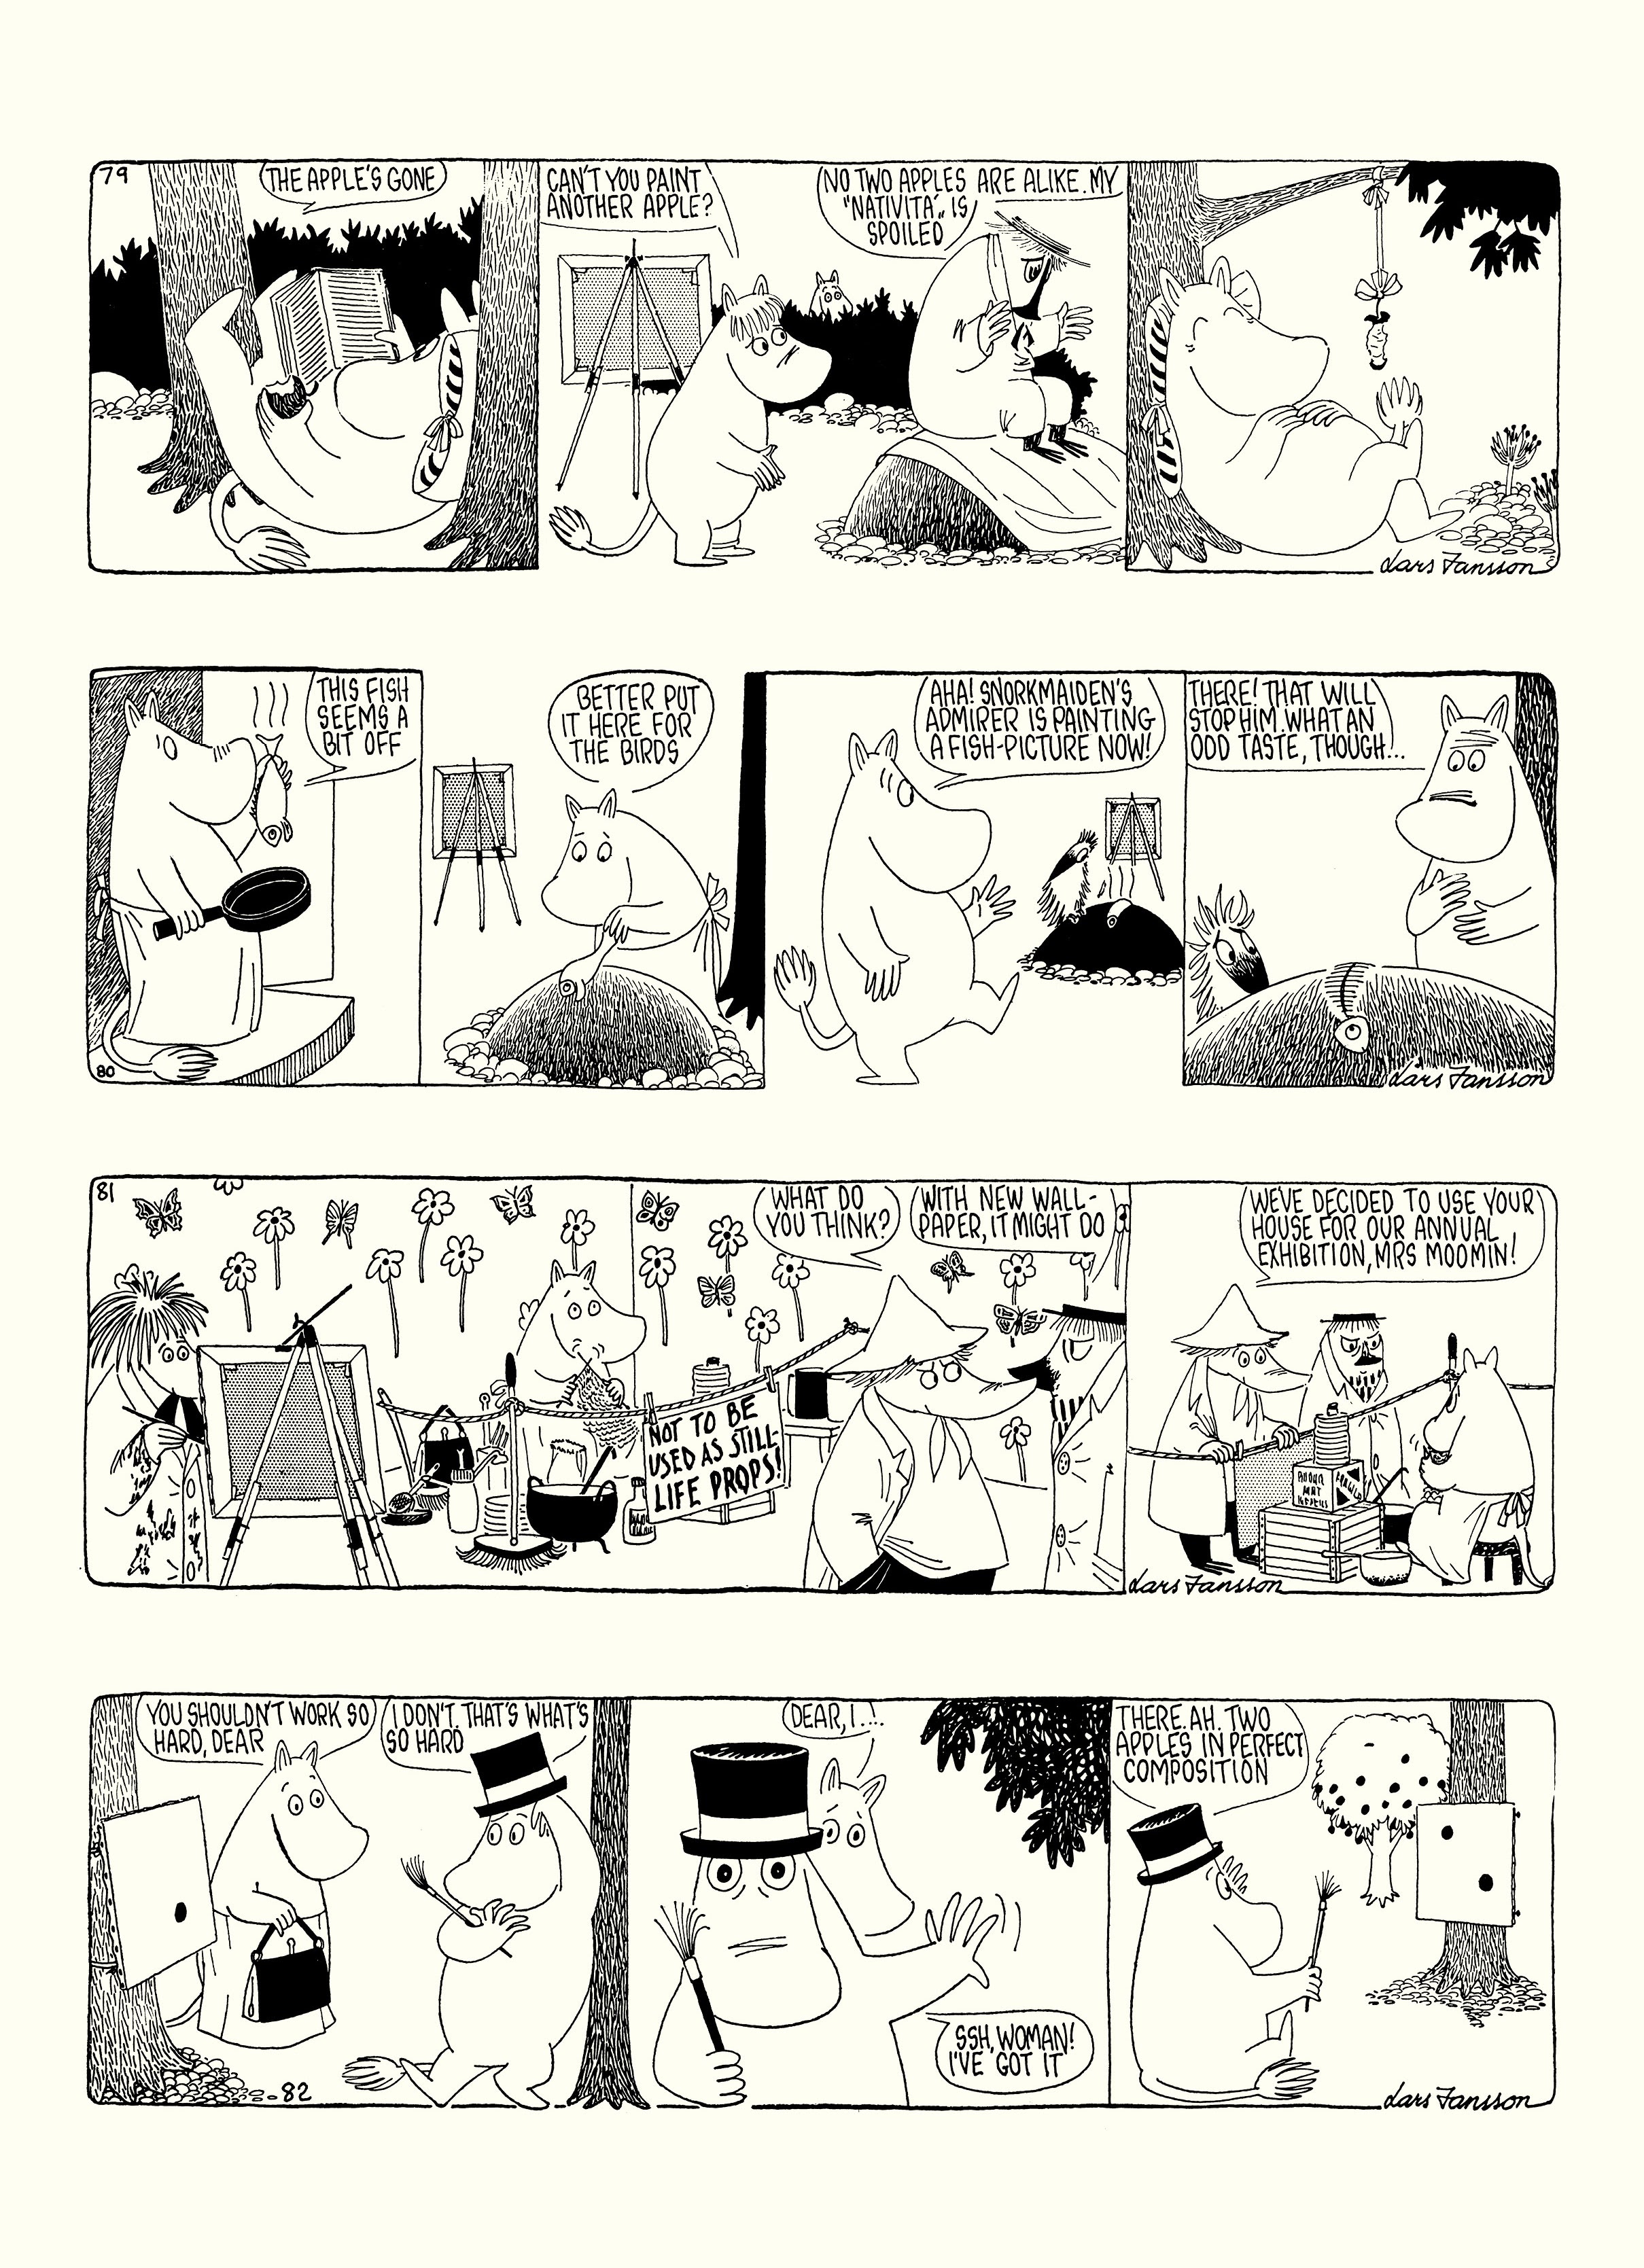 Read online Moomin: The Complete Lars Jansson Comic Strip comic -  Issue # TPB 8 - 47